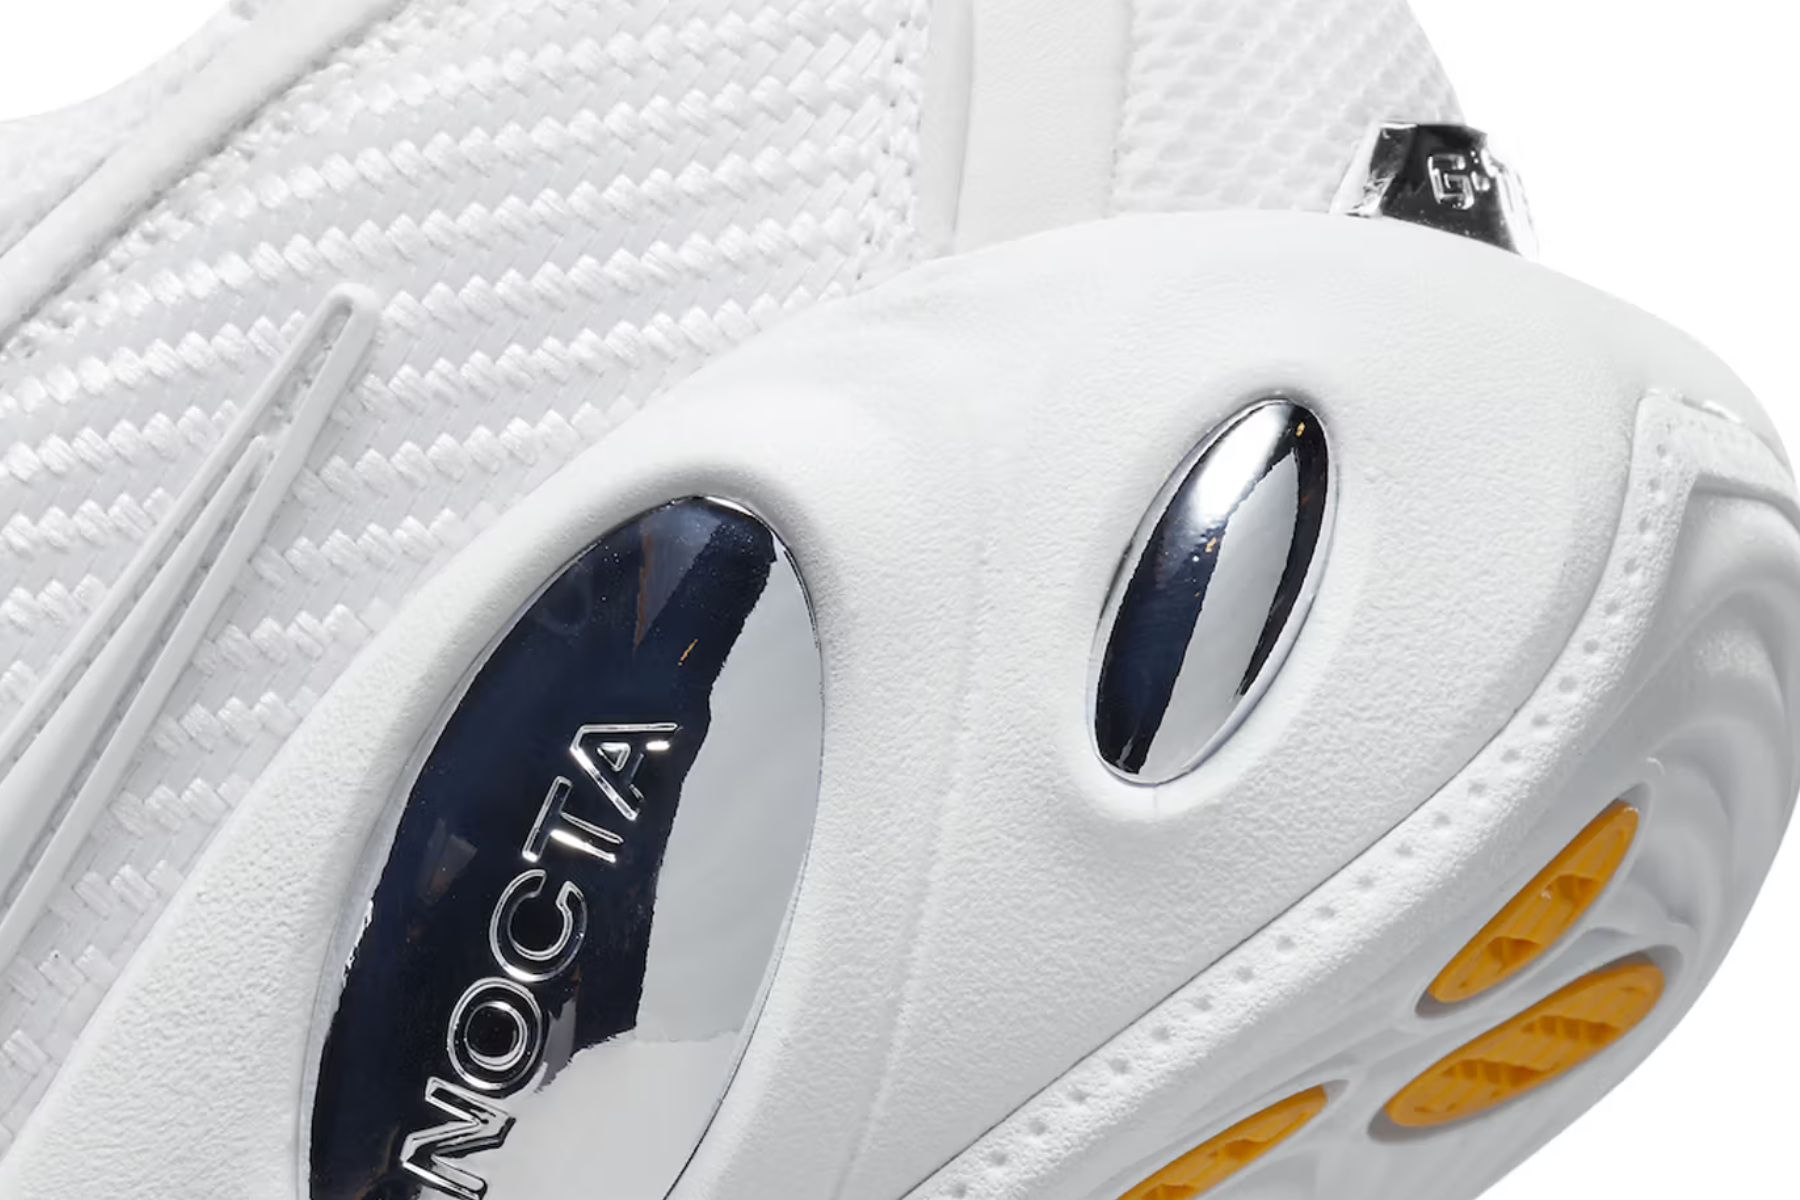 Drake's Nike NOCTA Glide looks to be dropping in a "White Chrome" colorway.